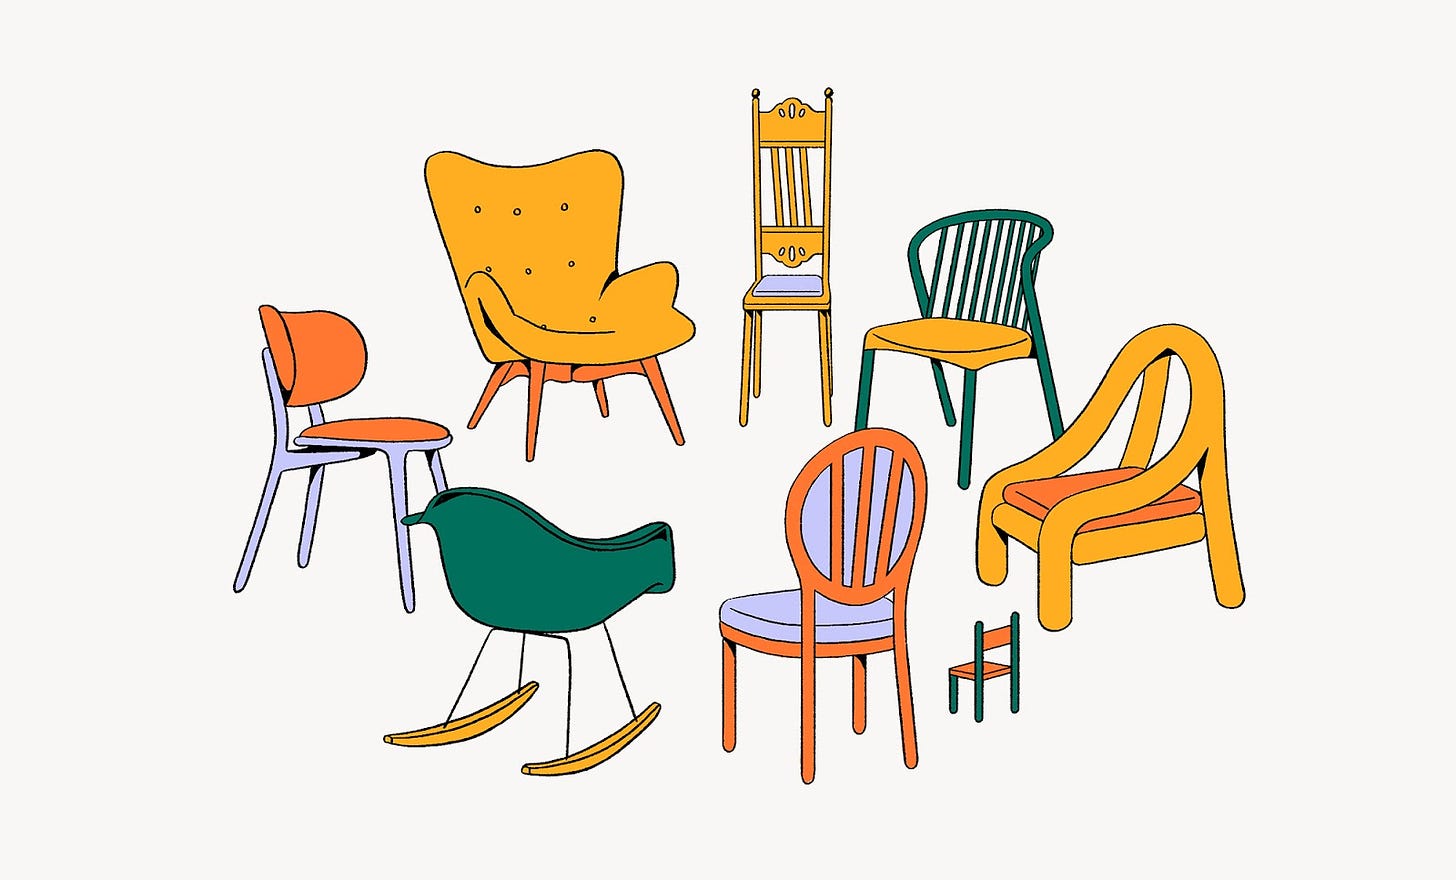 An illustration of many chairs of different shapes and sizes arranged in a circle.